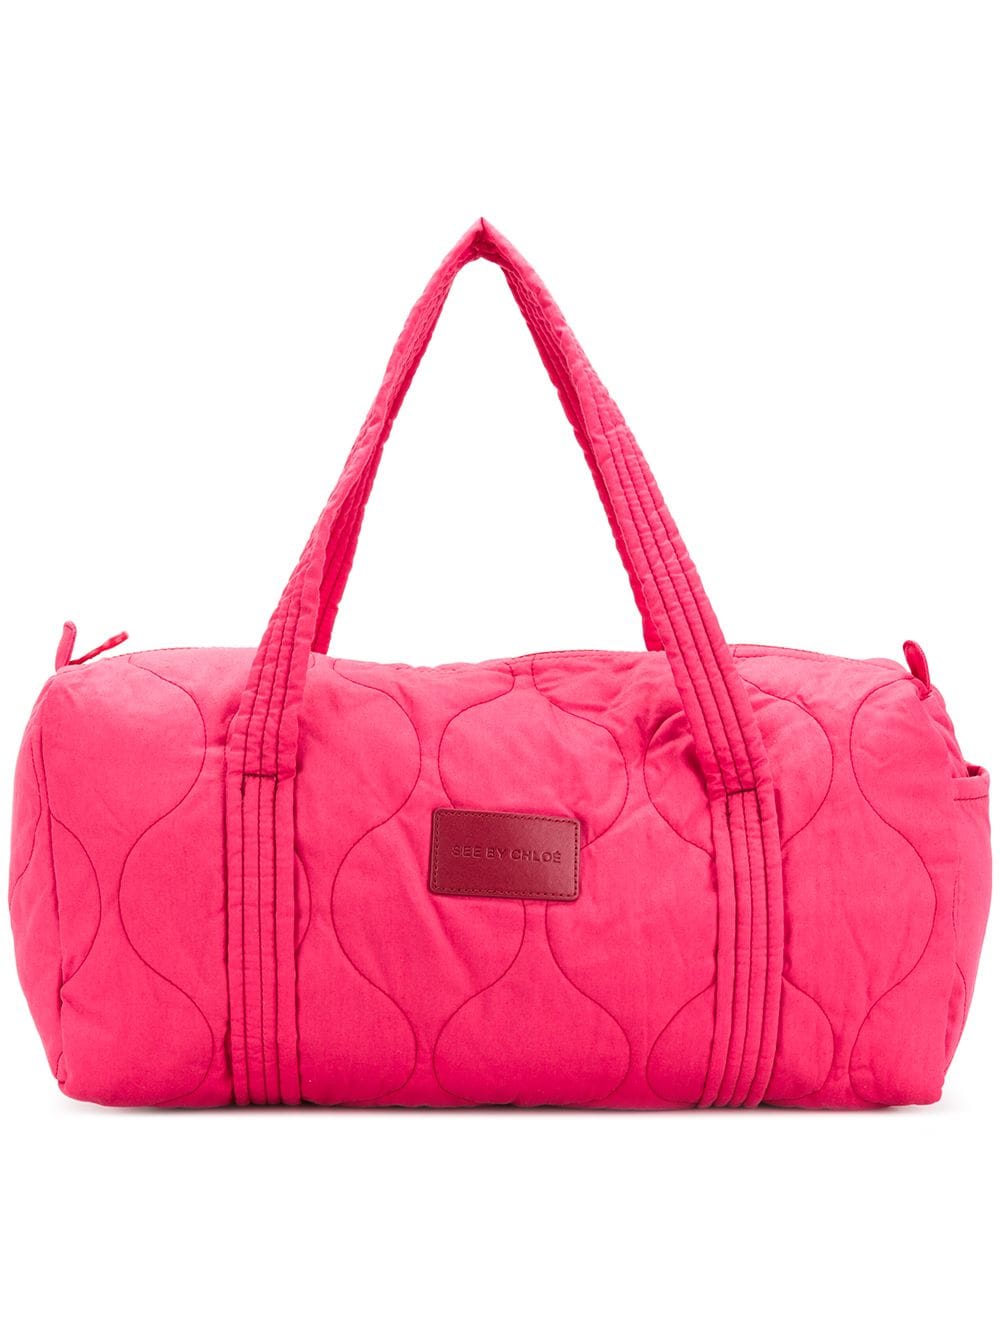 SEE BY CHLOÉ QUILTED DUFFLE TOTE,9S7382N18512945567